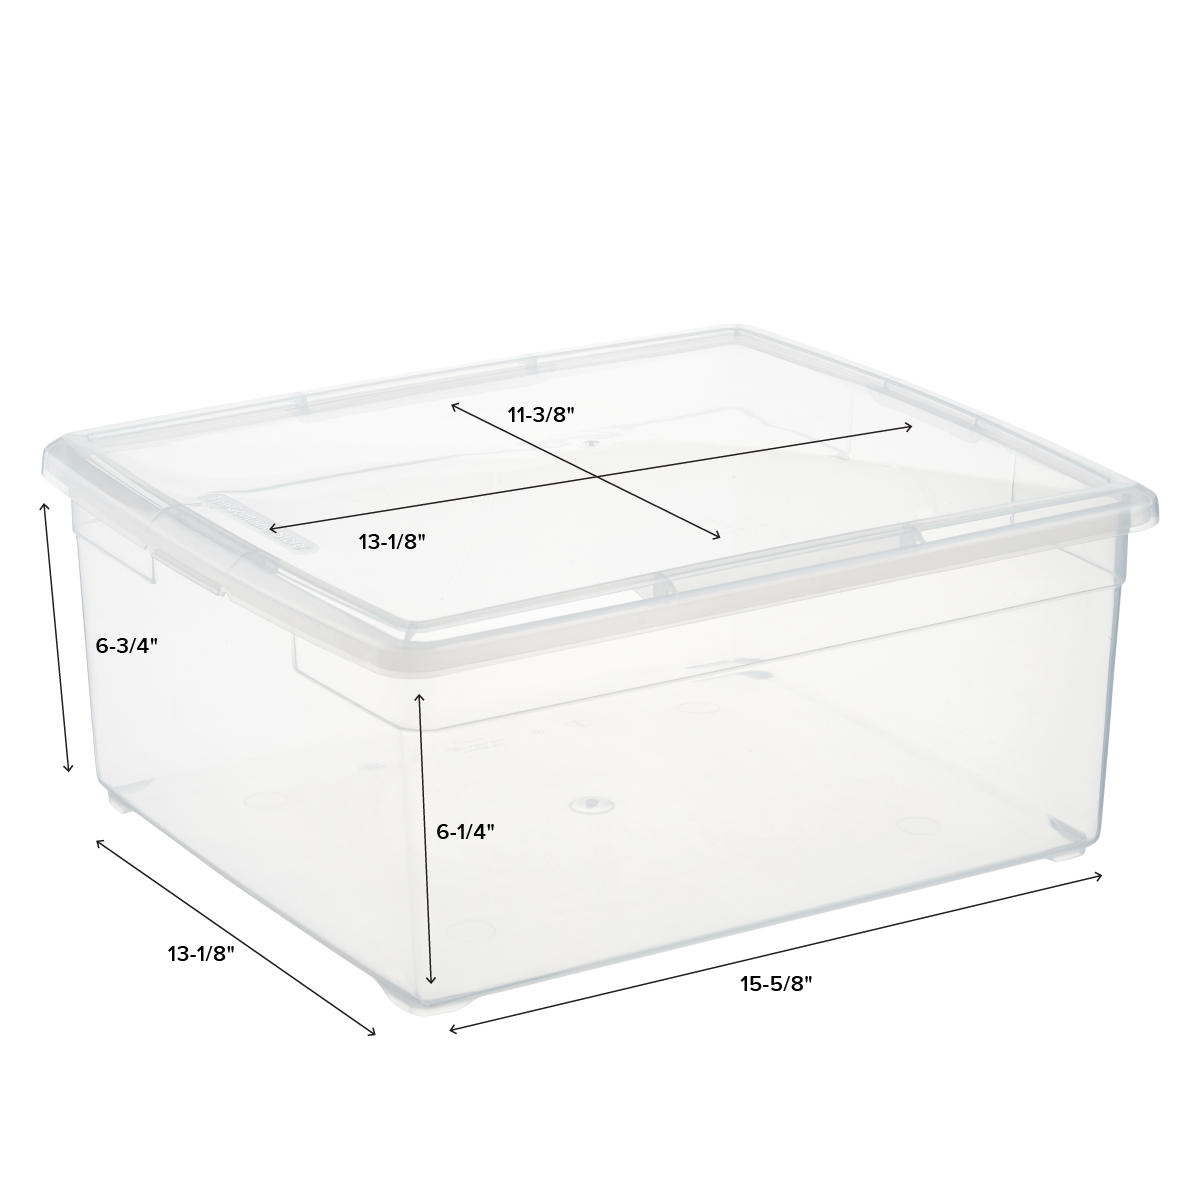 https://www.containerstore.com/catalogimages/419709/10008761-our-sweater-box-DIM.jpg